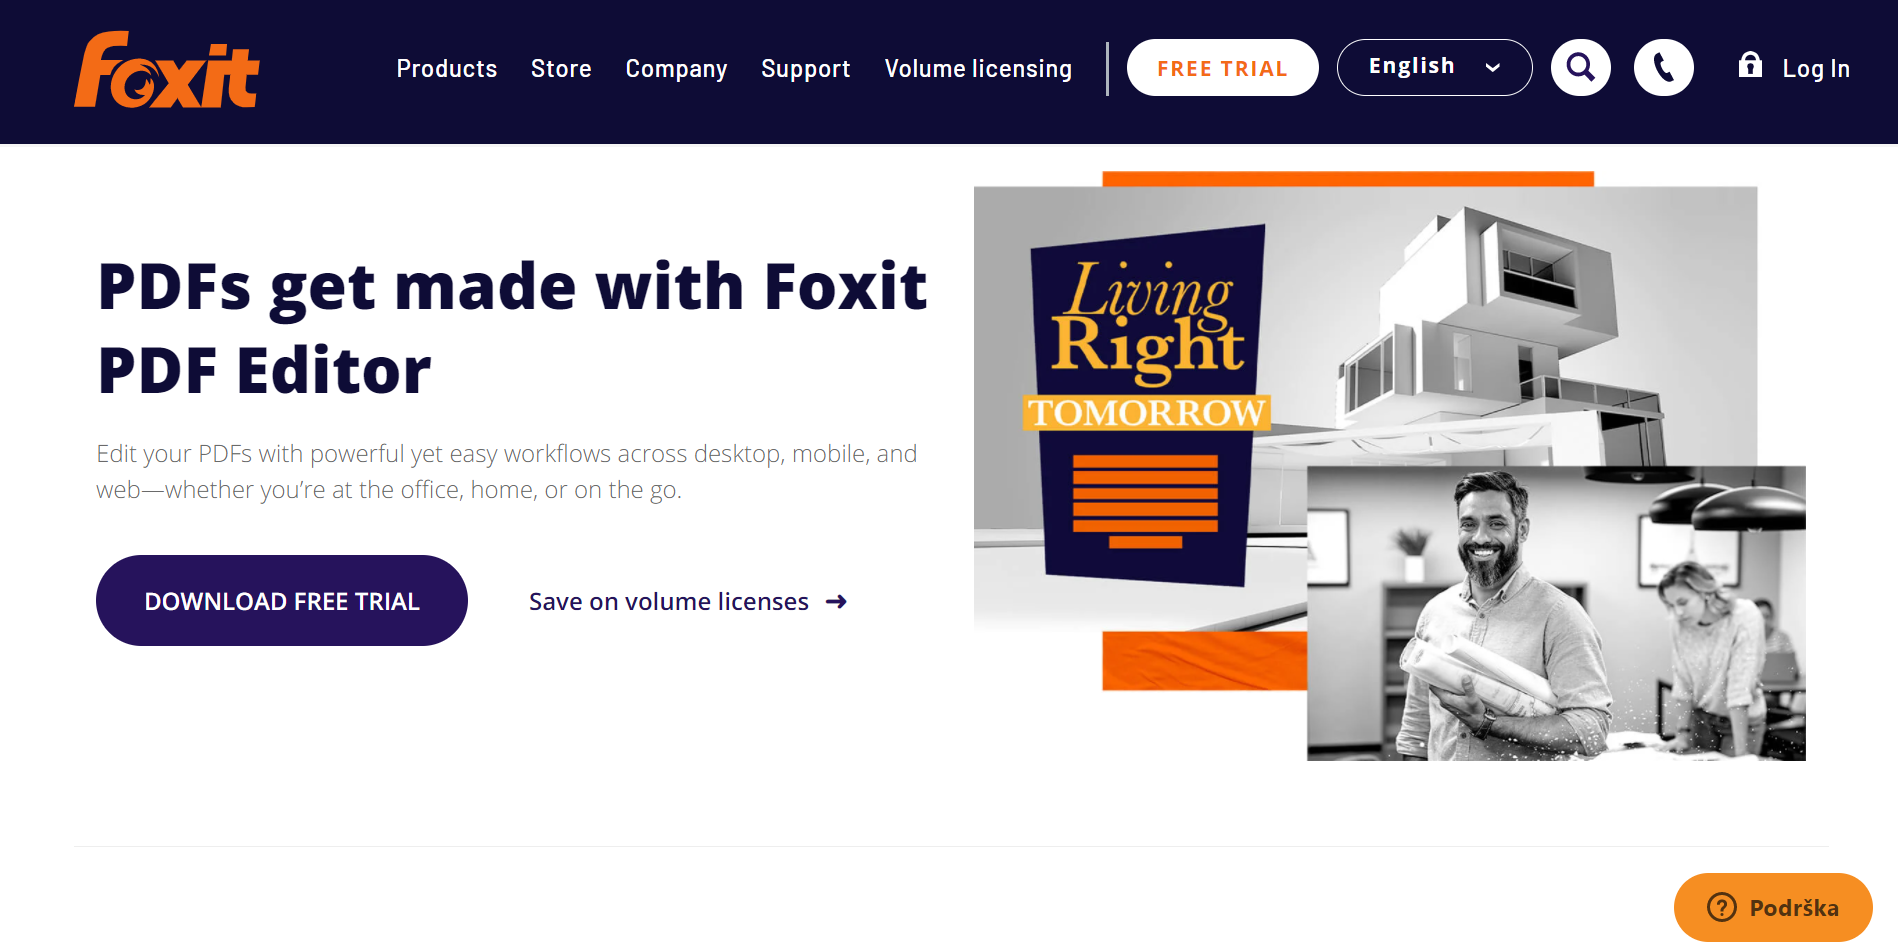 Foxit homepage